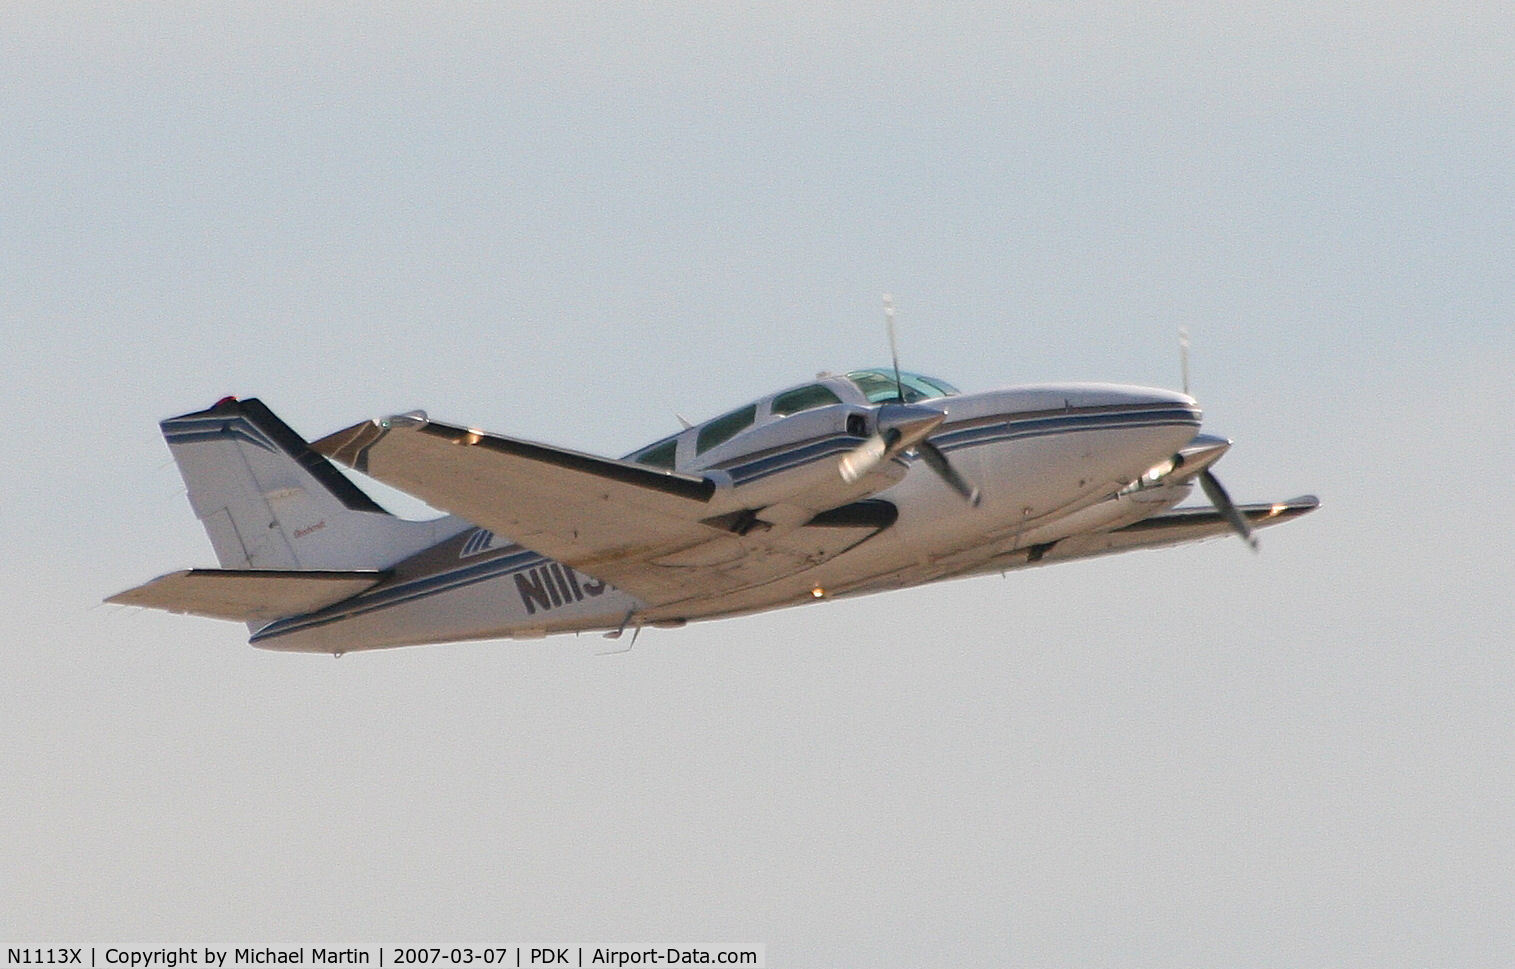 N1113X, 1997 Raytheon Aircraft Company 58 C/N TH-1813, Departing PDK enroute to TVI